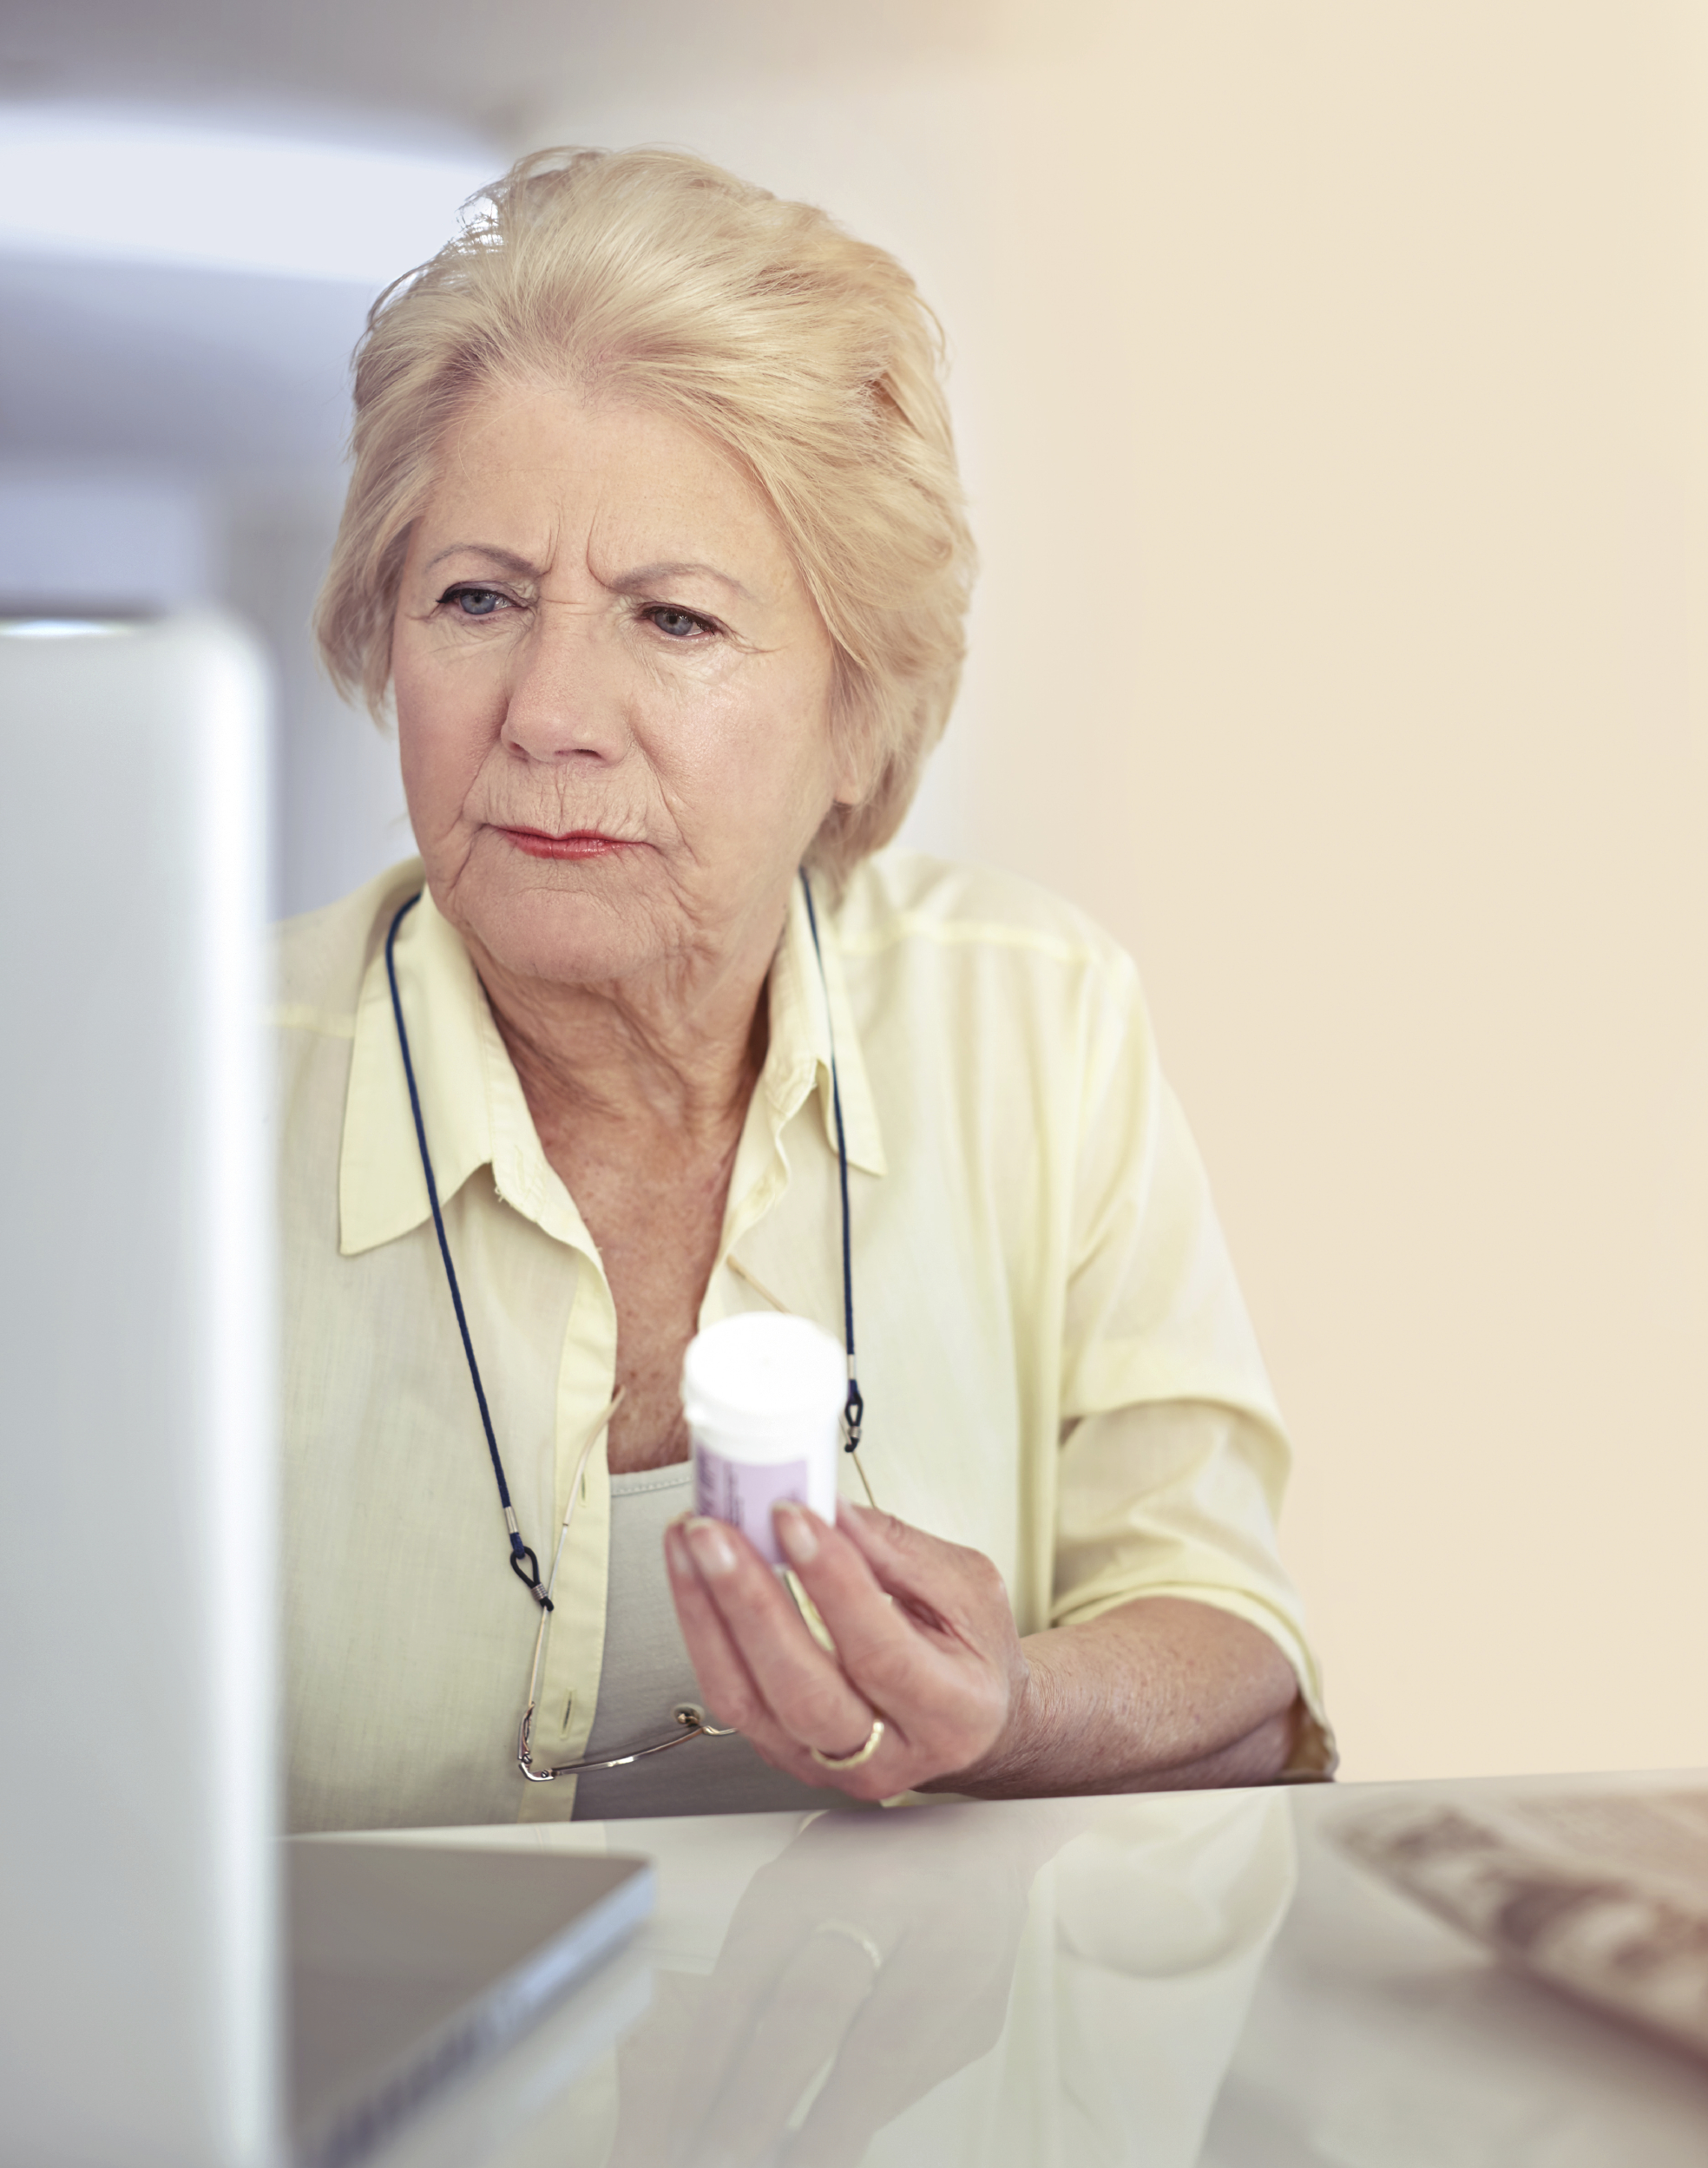 Elderly woman holds a prescription bottle and looks at a computer.